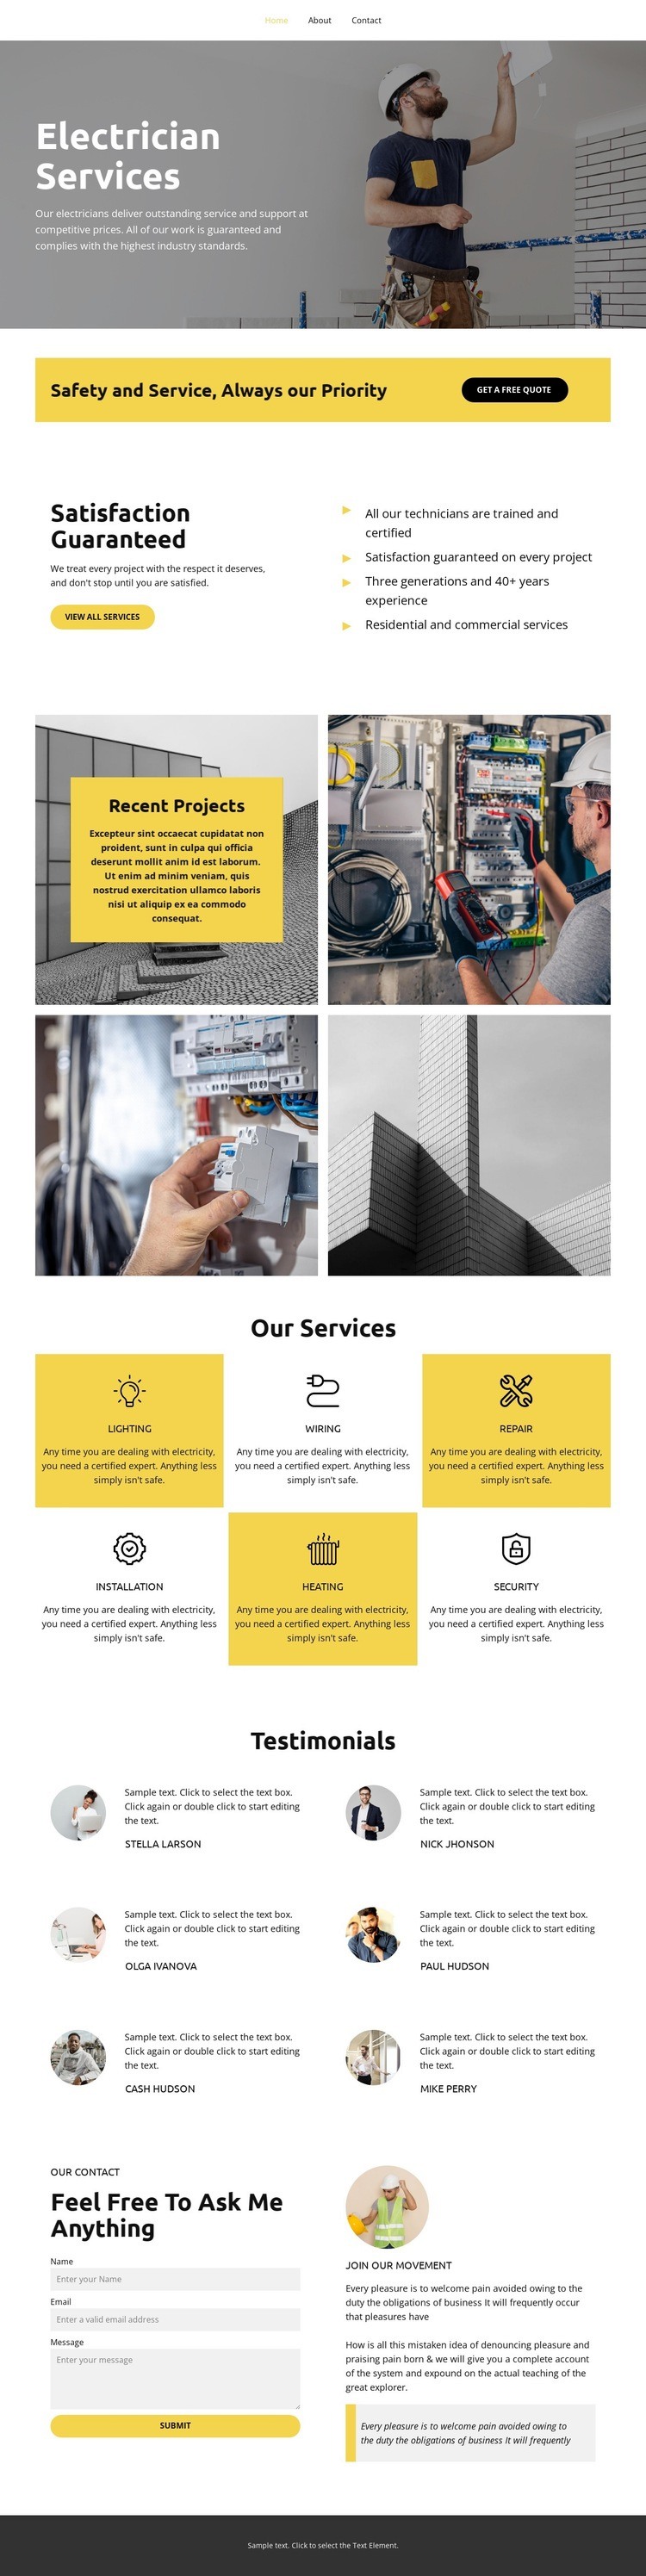 Electrician Services Homepage Design